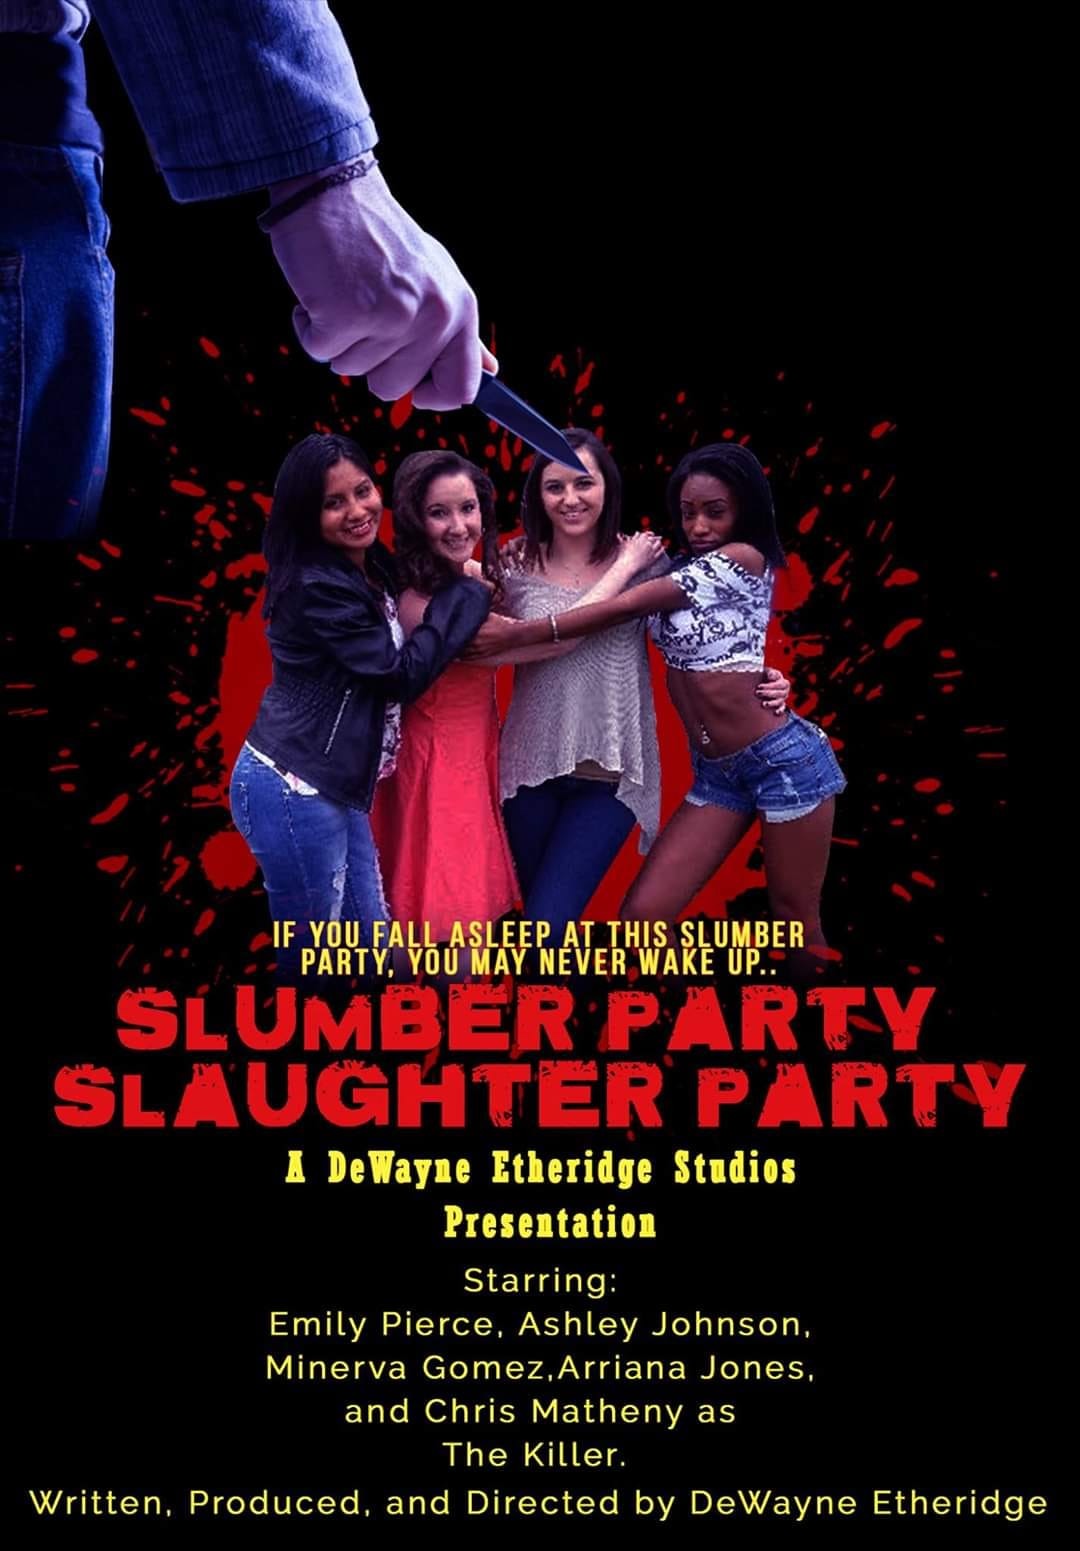 Slumber Party Slaughter Party (2016) Screenshot 2